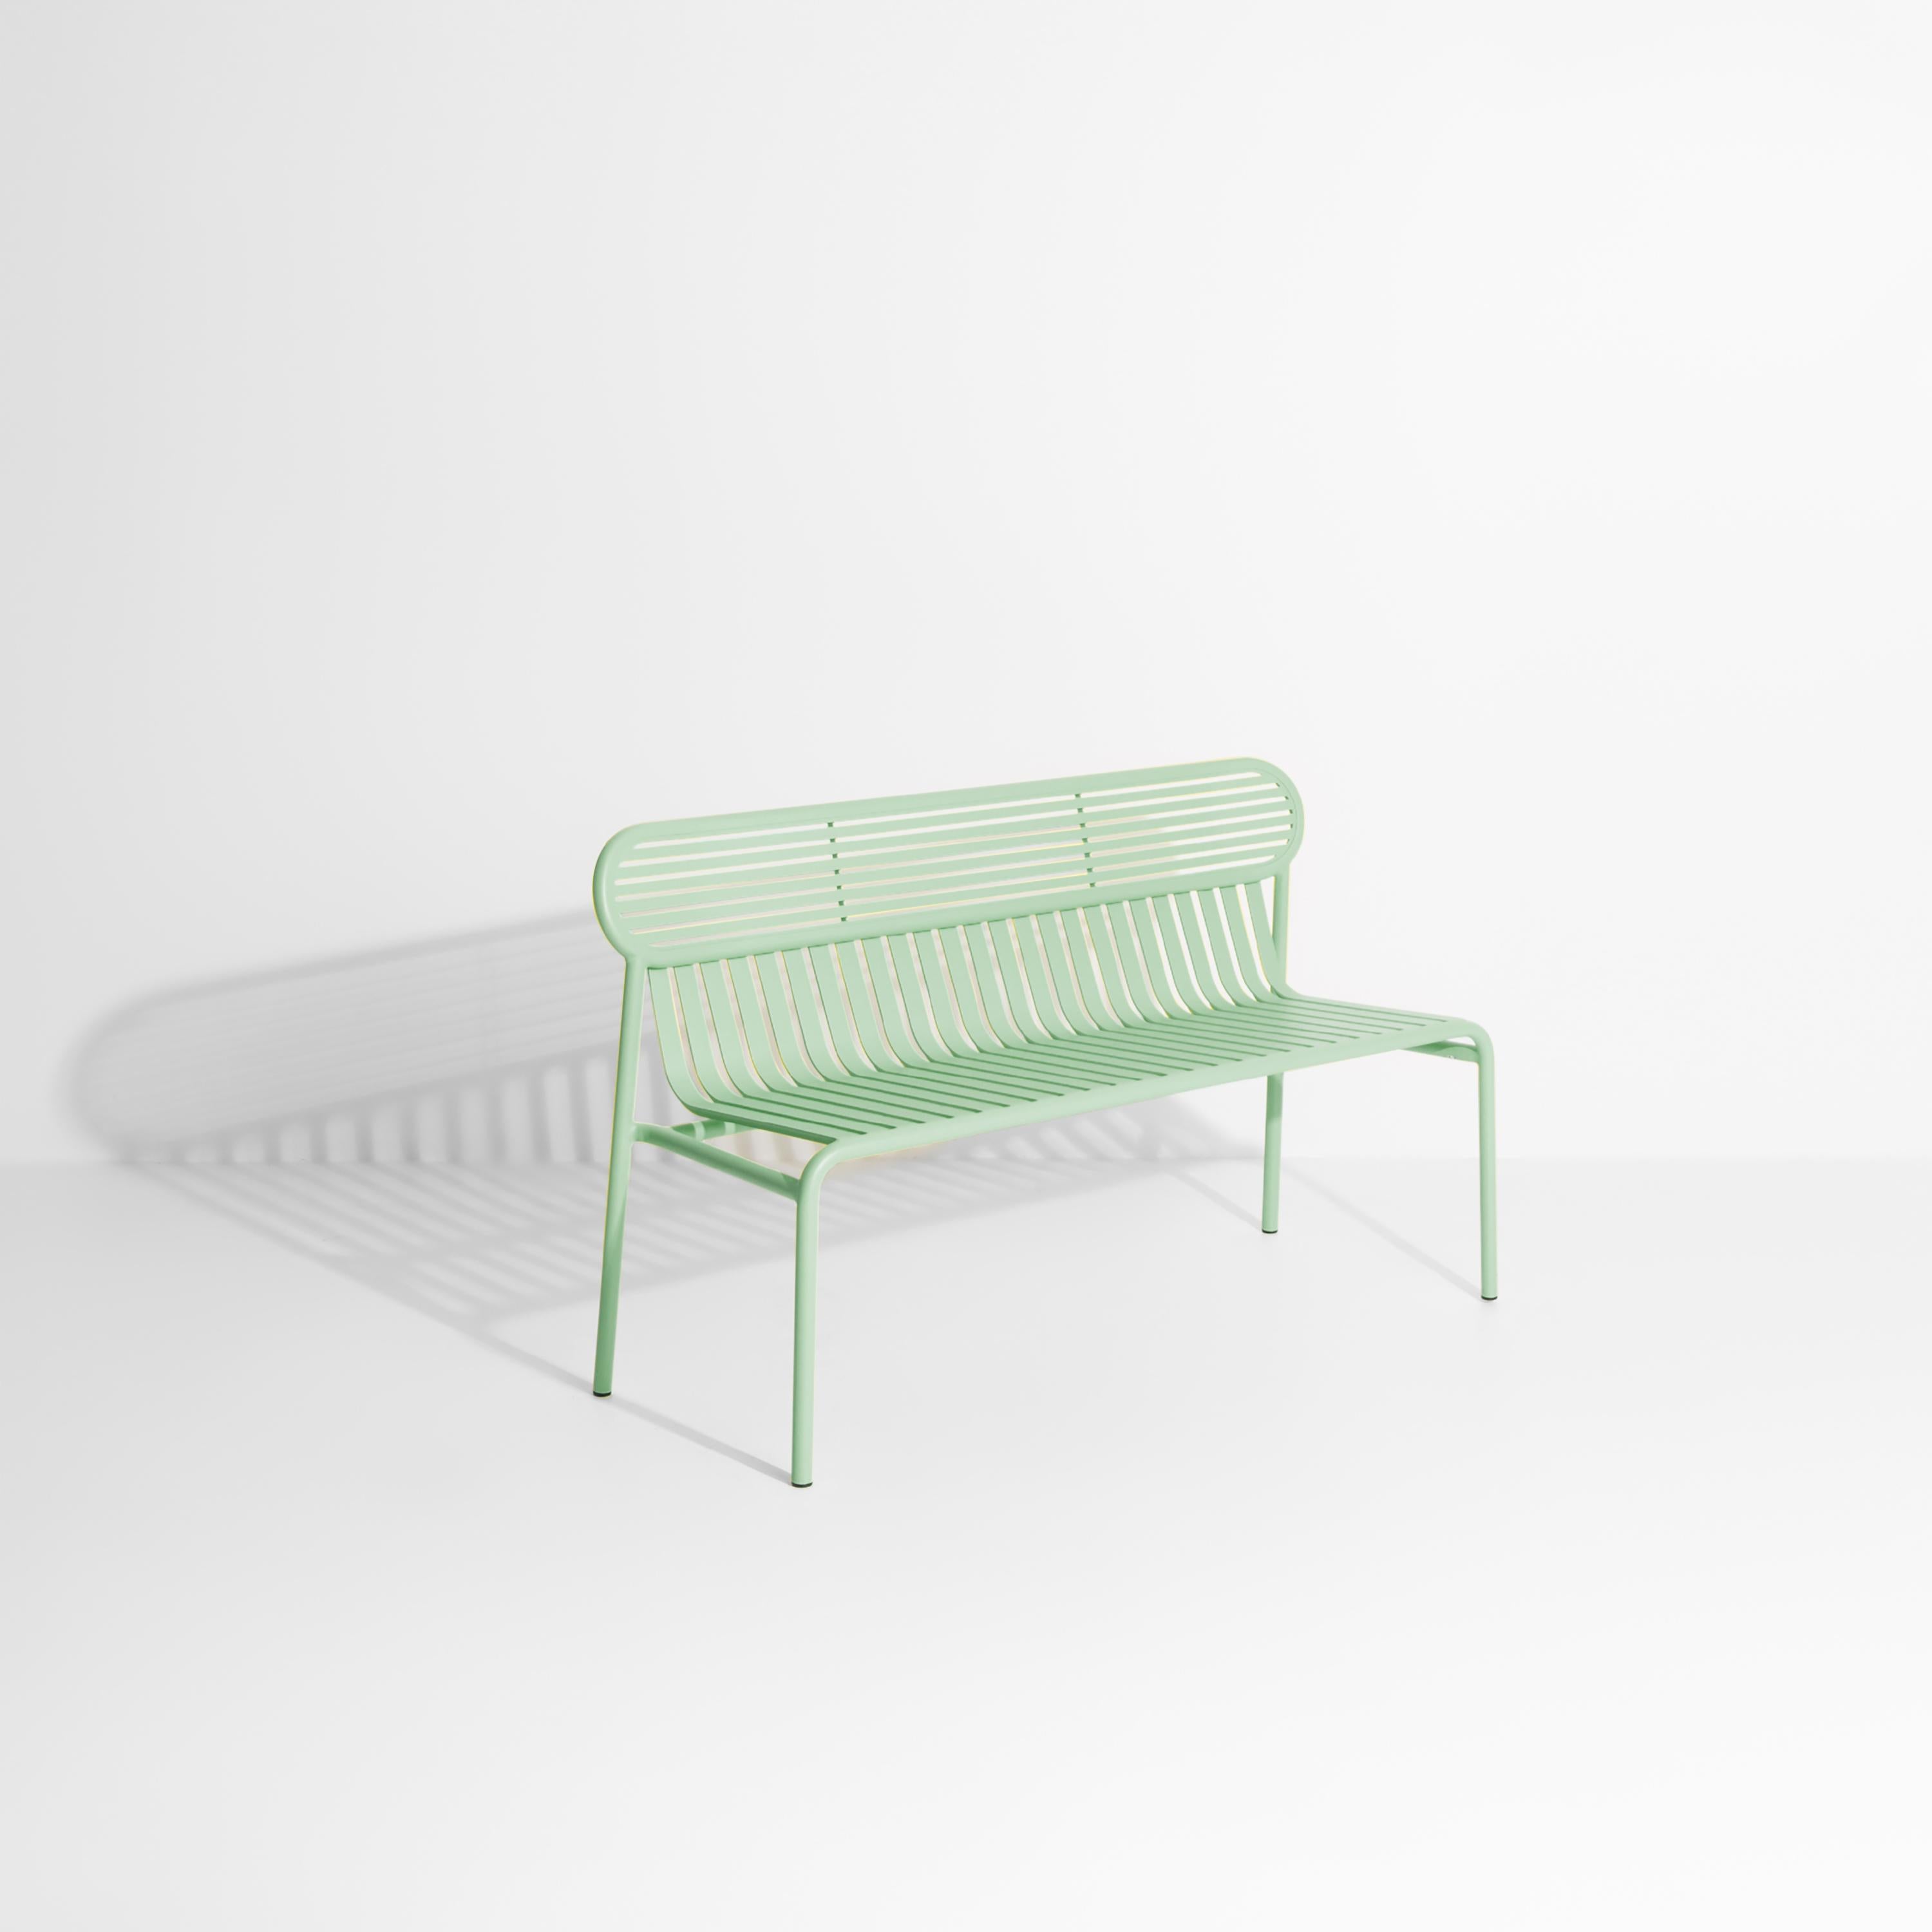 Petite Friture Week-End Bench in Pastel Green Aluminium by Studio BrichetZiegler, 2017

The week-end collection is a full range of outdoor furniture, in aluminium grained epoxy paint, matt finish, that includes 18 functions and 8 colours for the